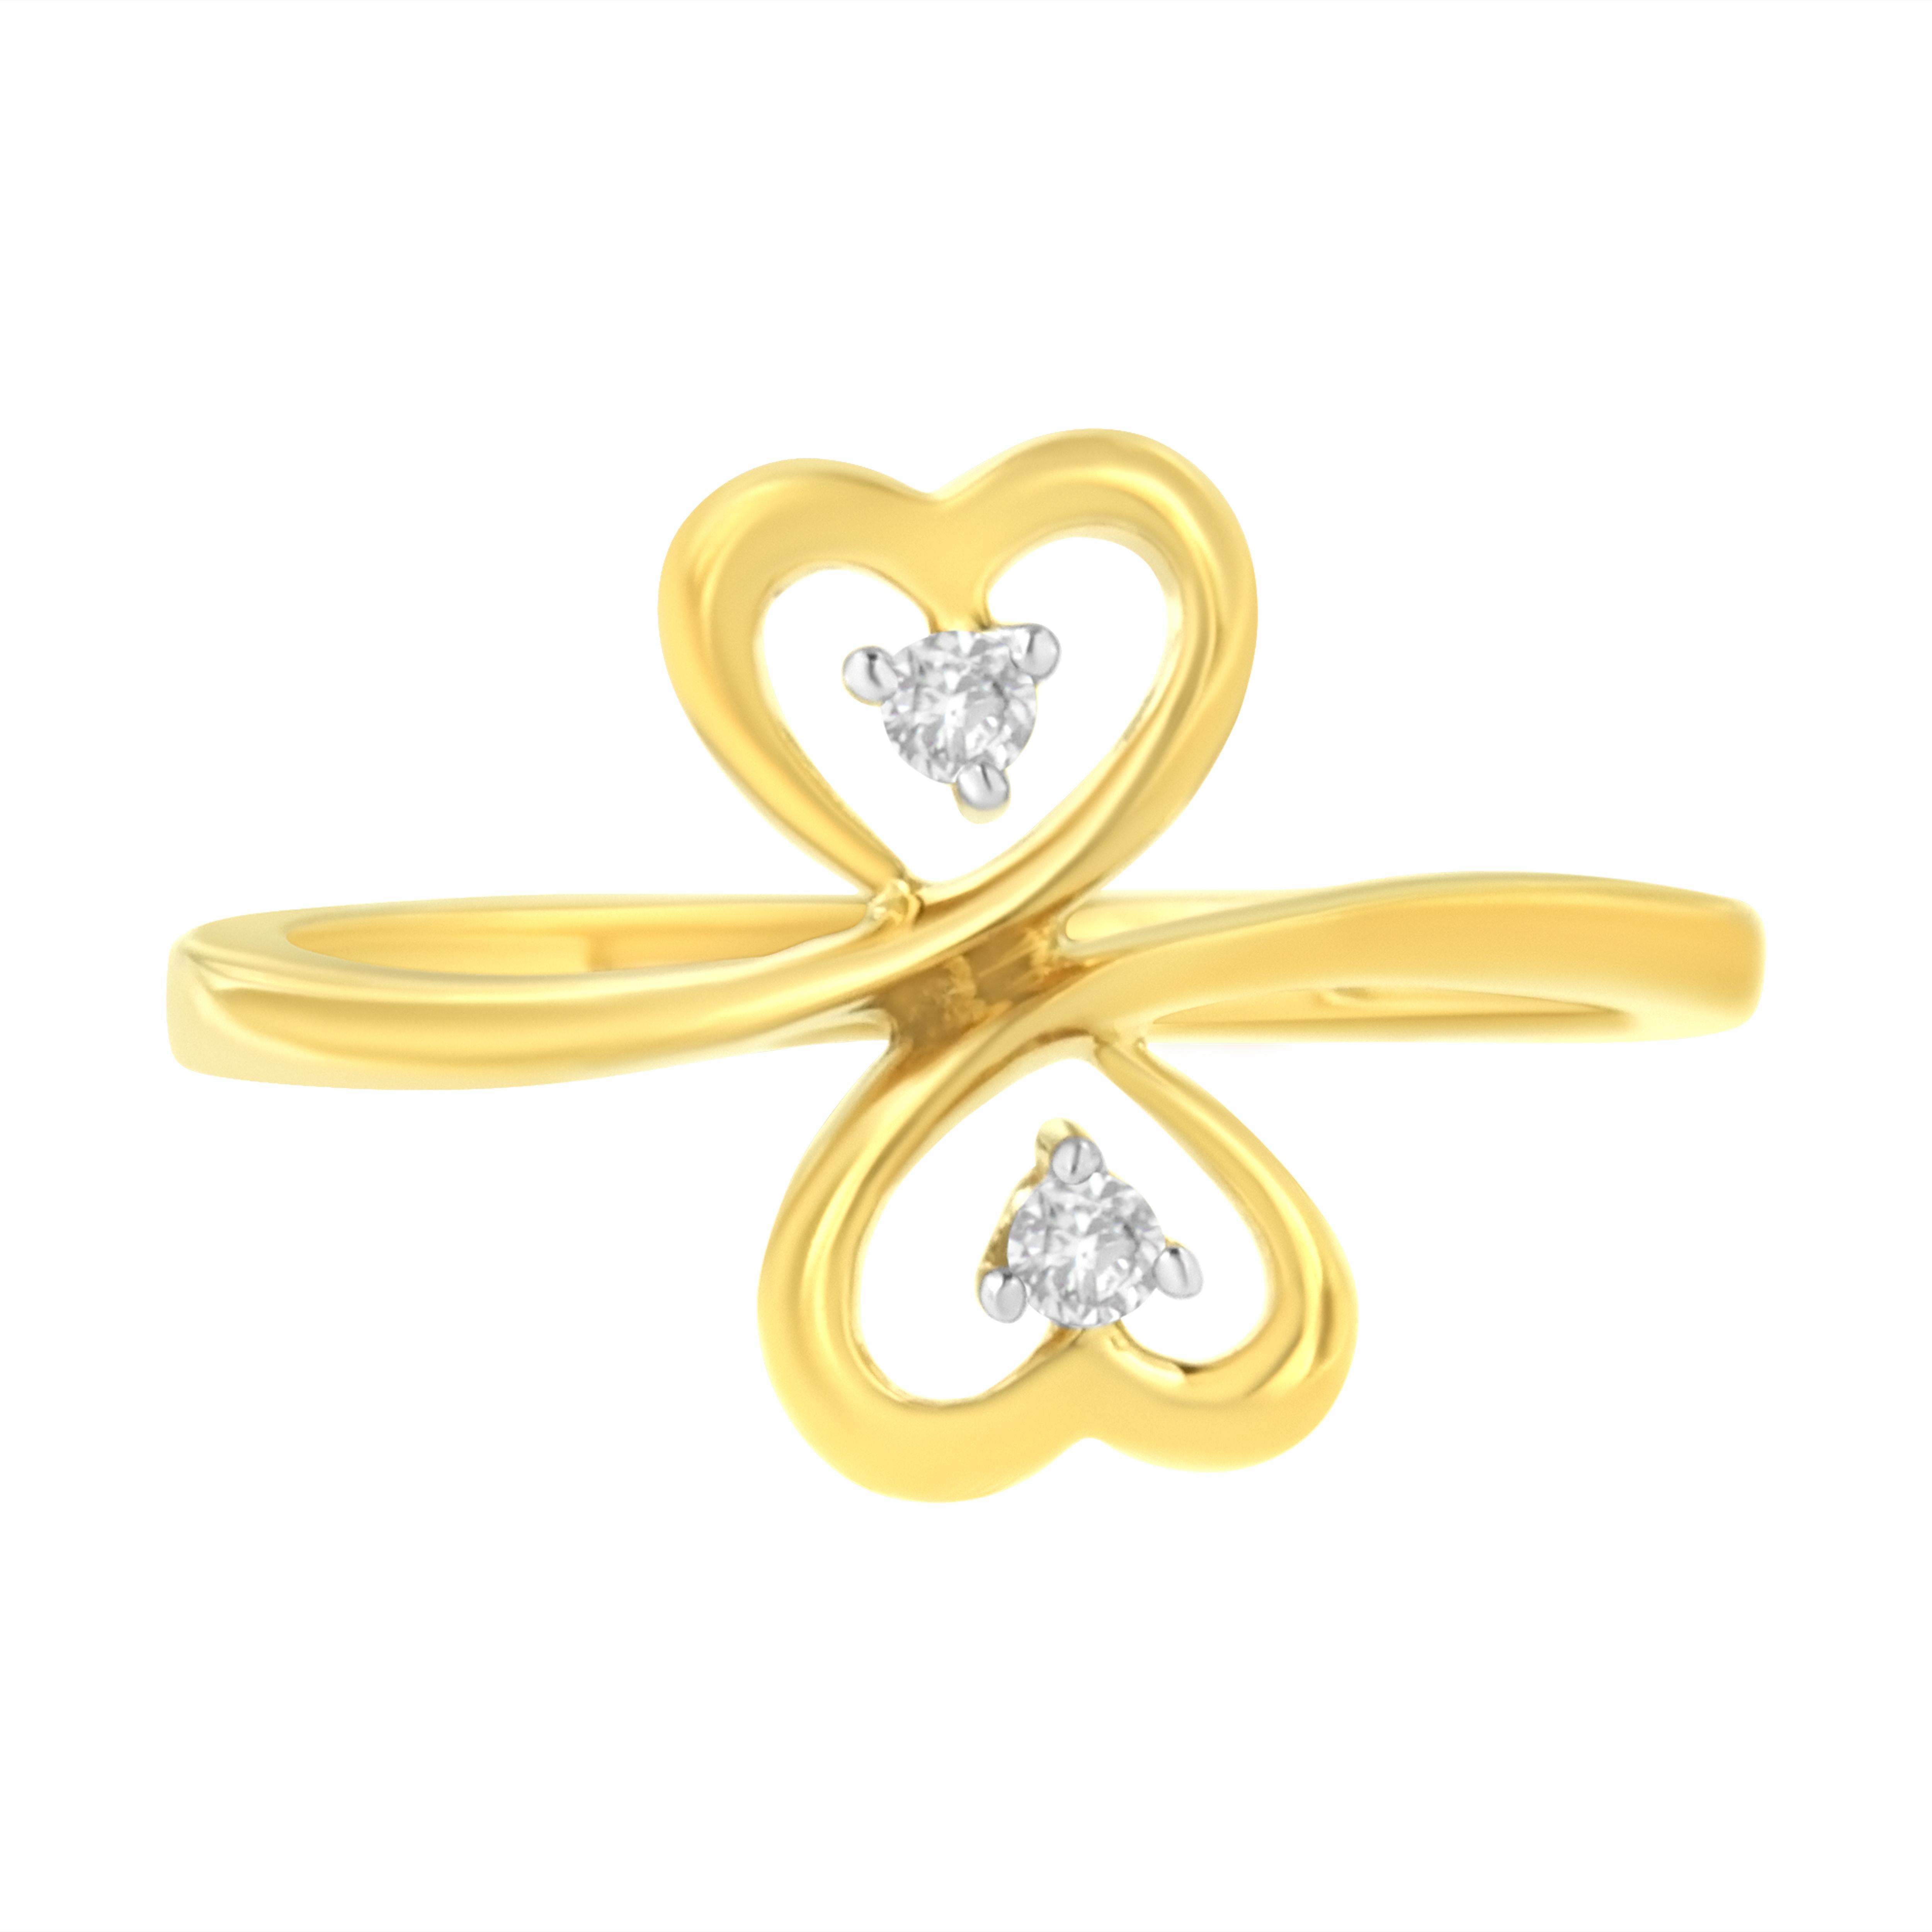 Present this delicate and lovely Dual Heart Diamond Ring as a striking symbol of your undying love. This captivating ring showcases 2 gorgeous round cut accented diamonds, beautifully prong set and rendered to glowing perfection on luminous 14 karat